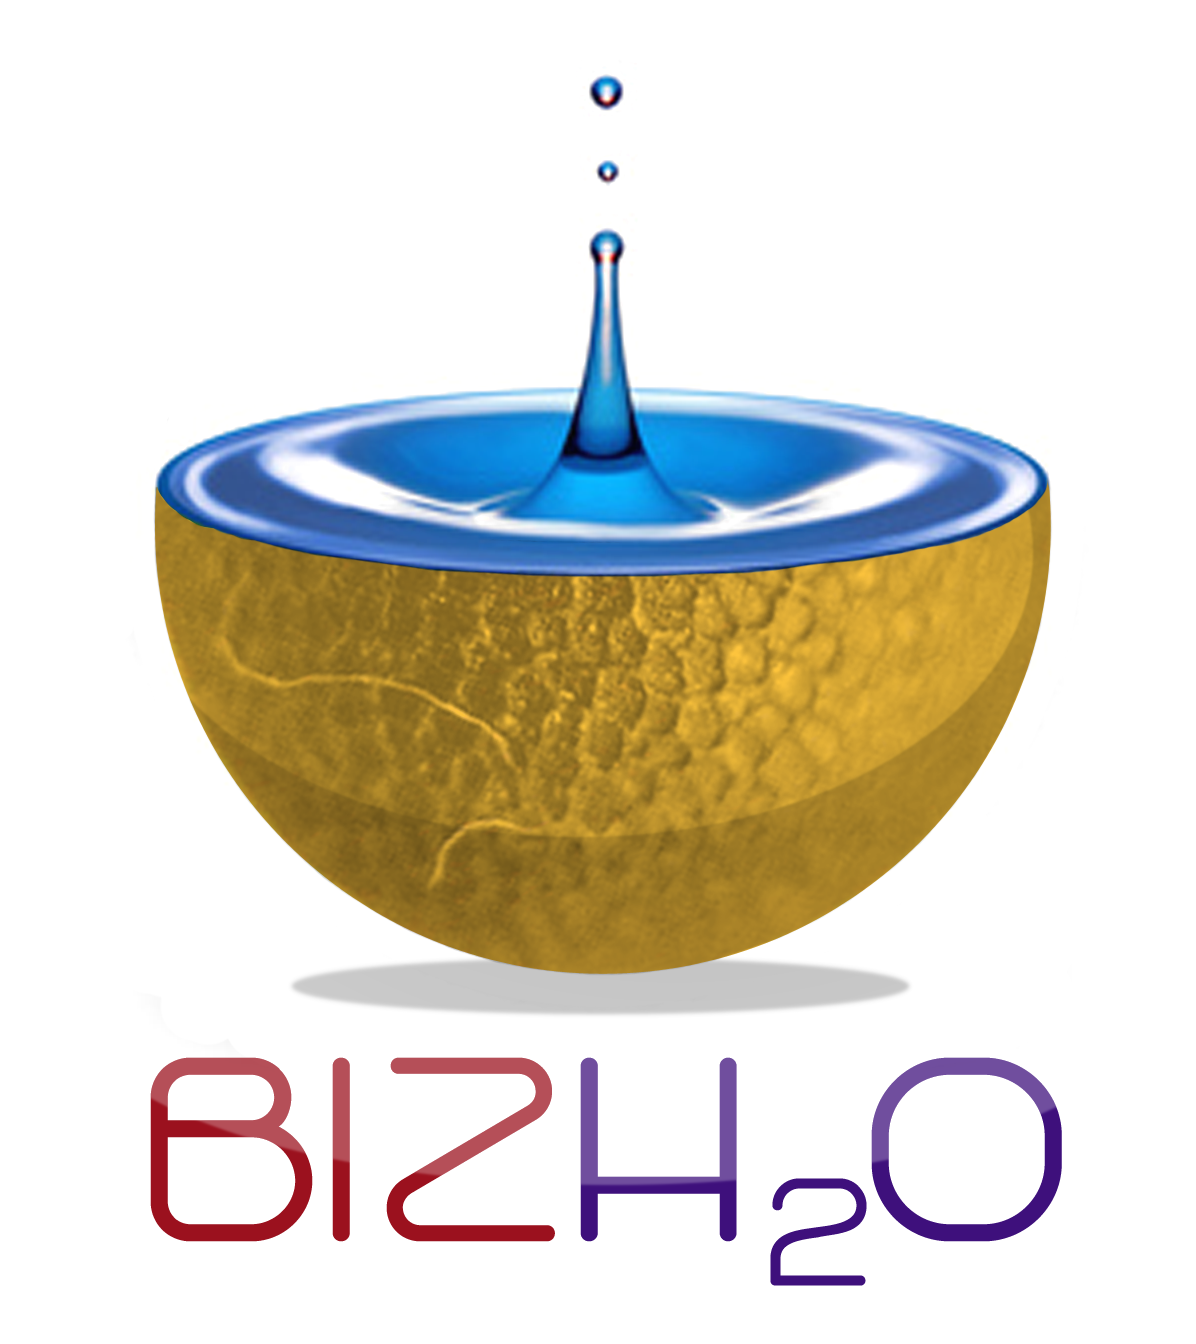 BIZH2O is a website which features latest updates and insights about business, accounting, social media, and more. It is an affiliate of @mseedsys